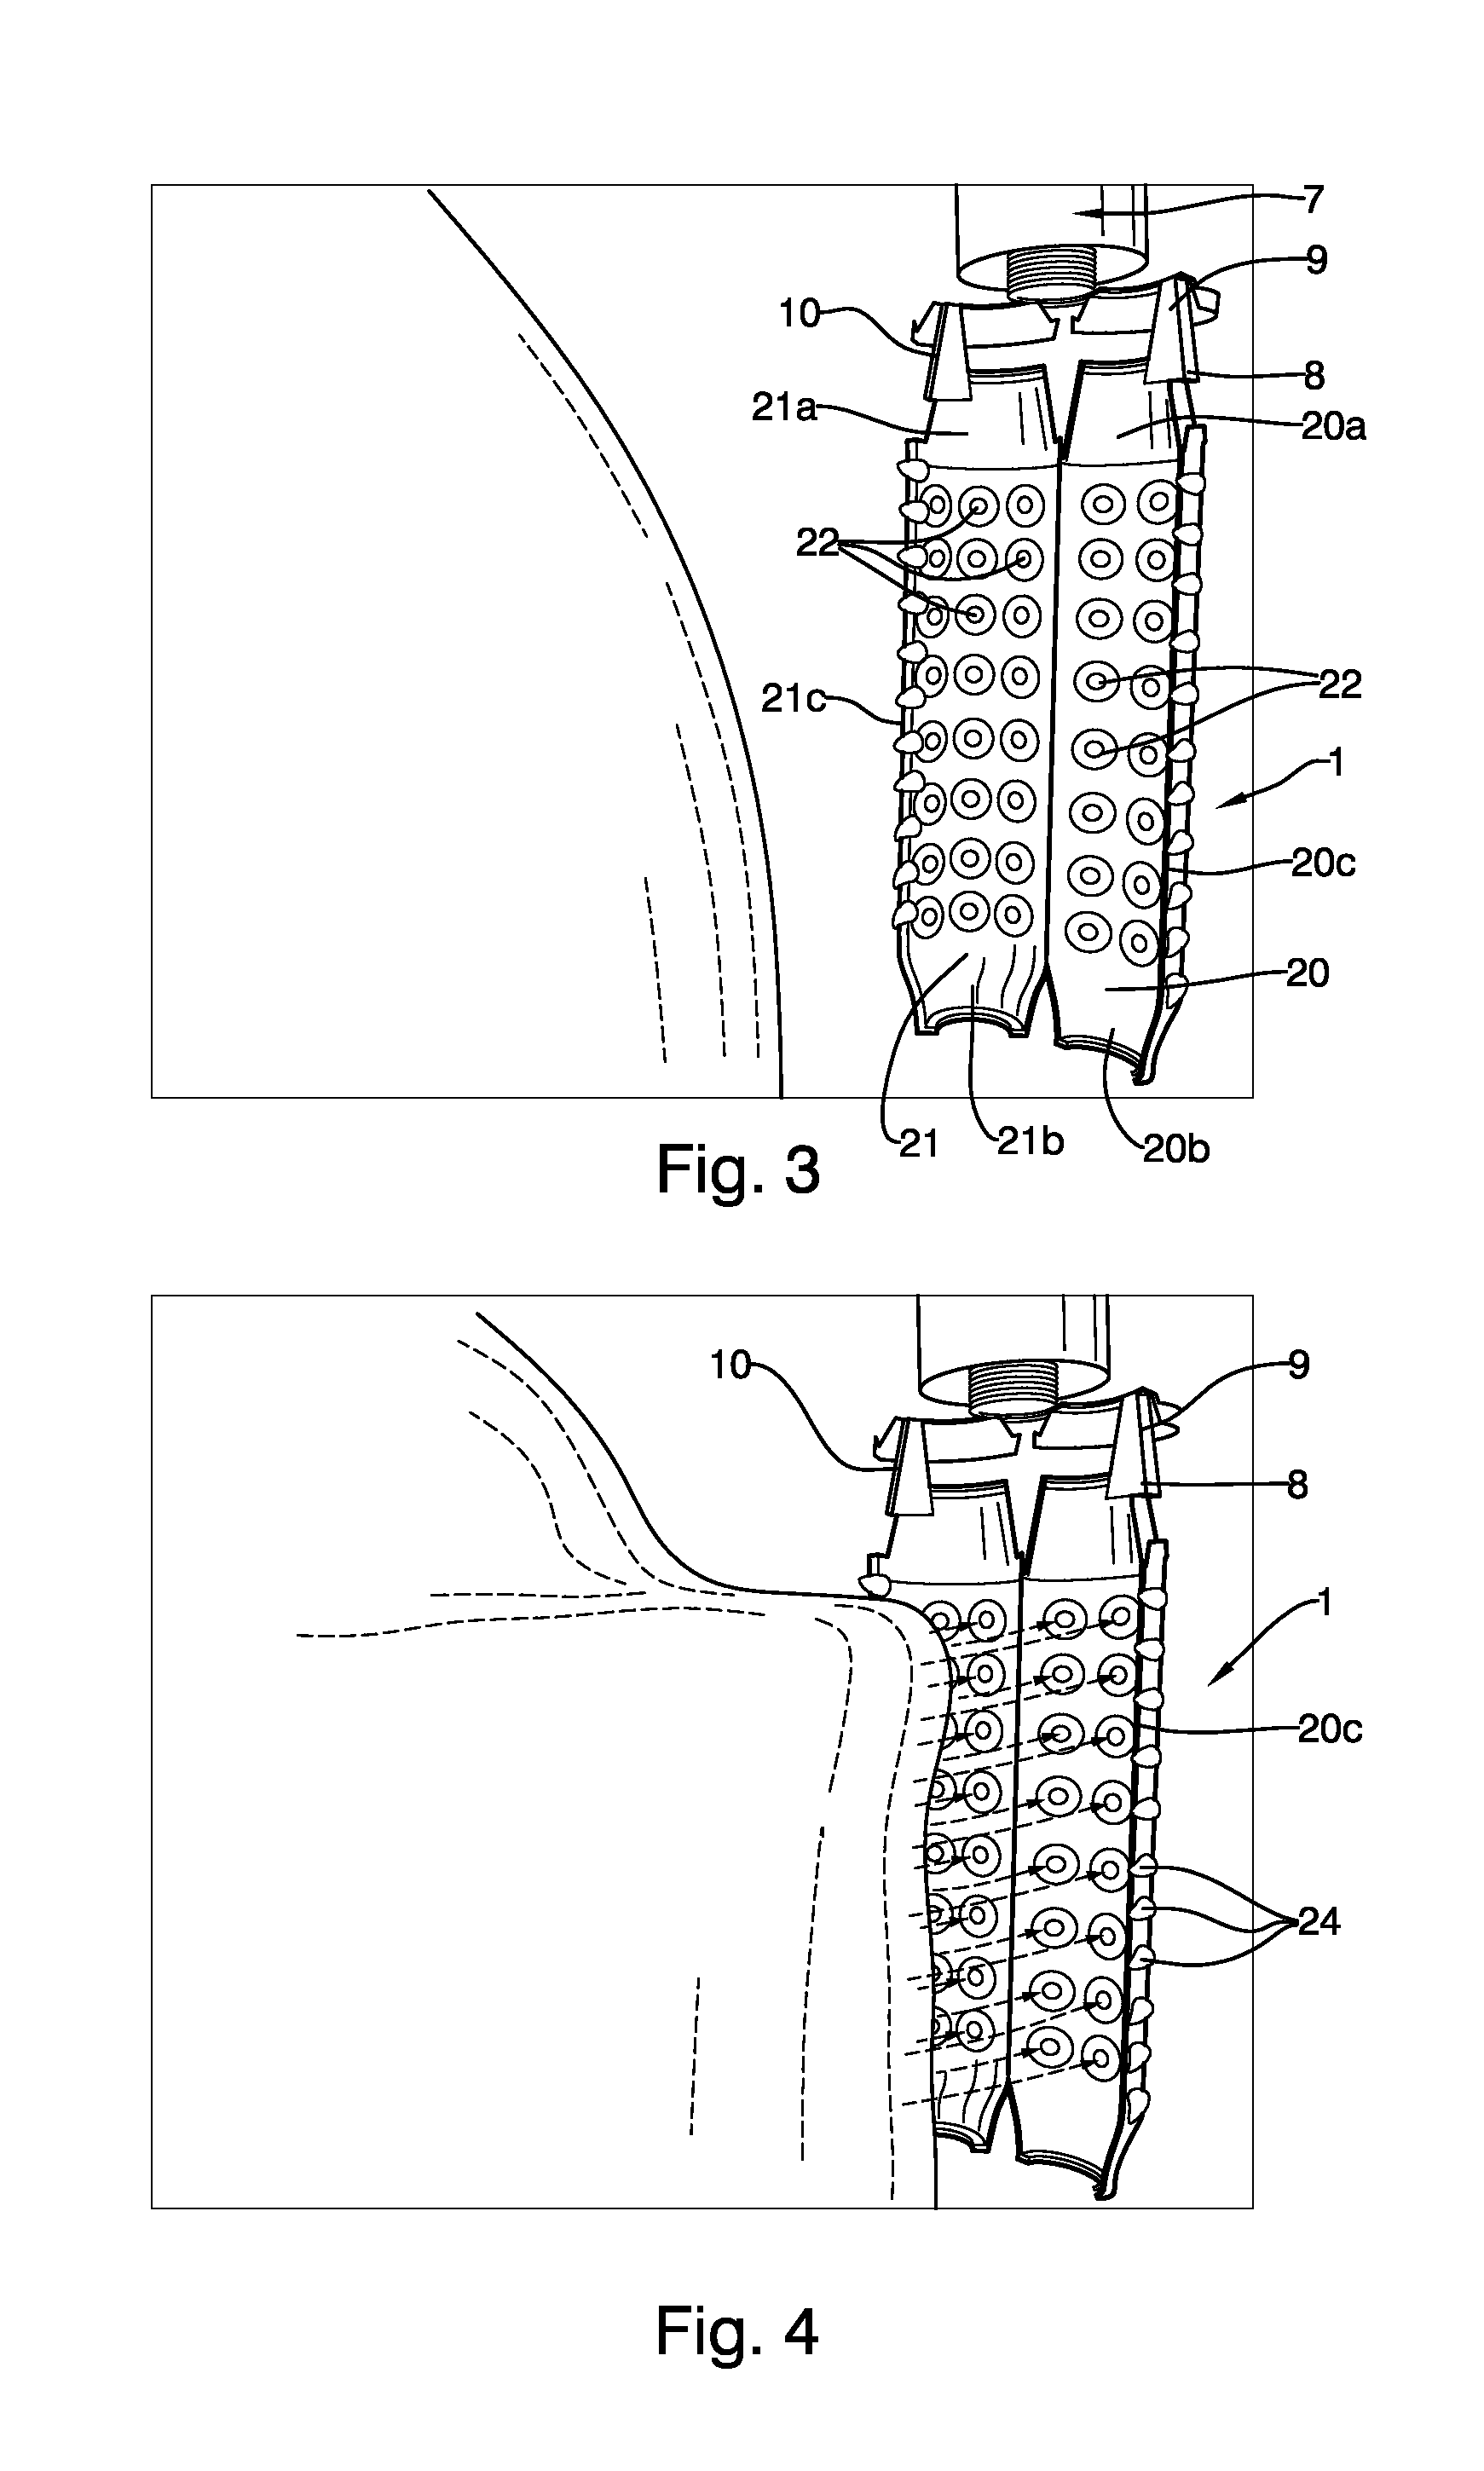 Endoscopic implantable device and method for the apposition of the stomach walls for reducing the stomach internal volume in a weight loss surgery procedure